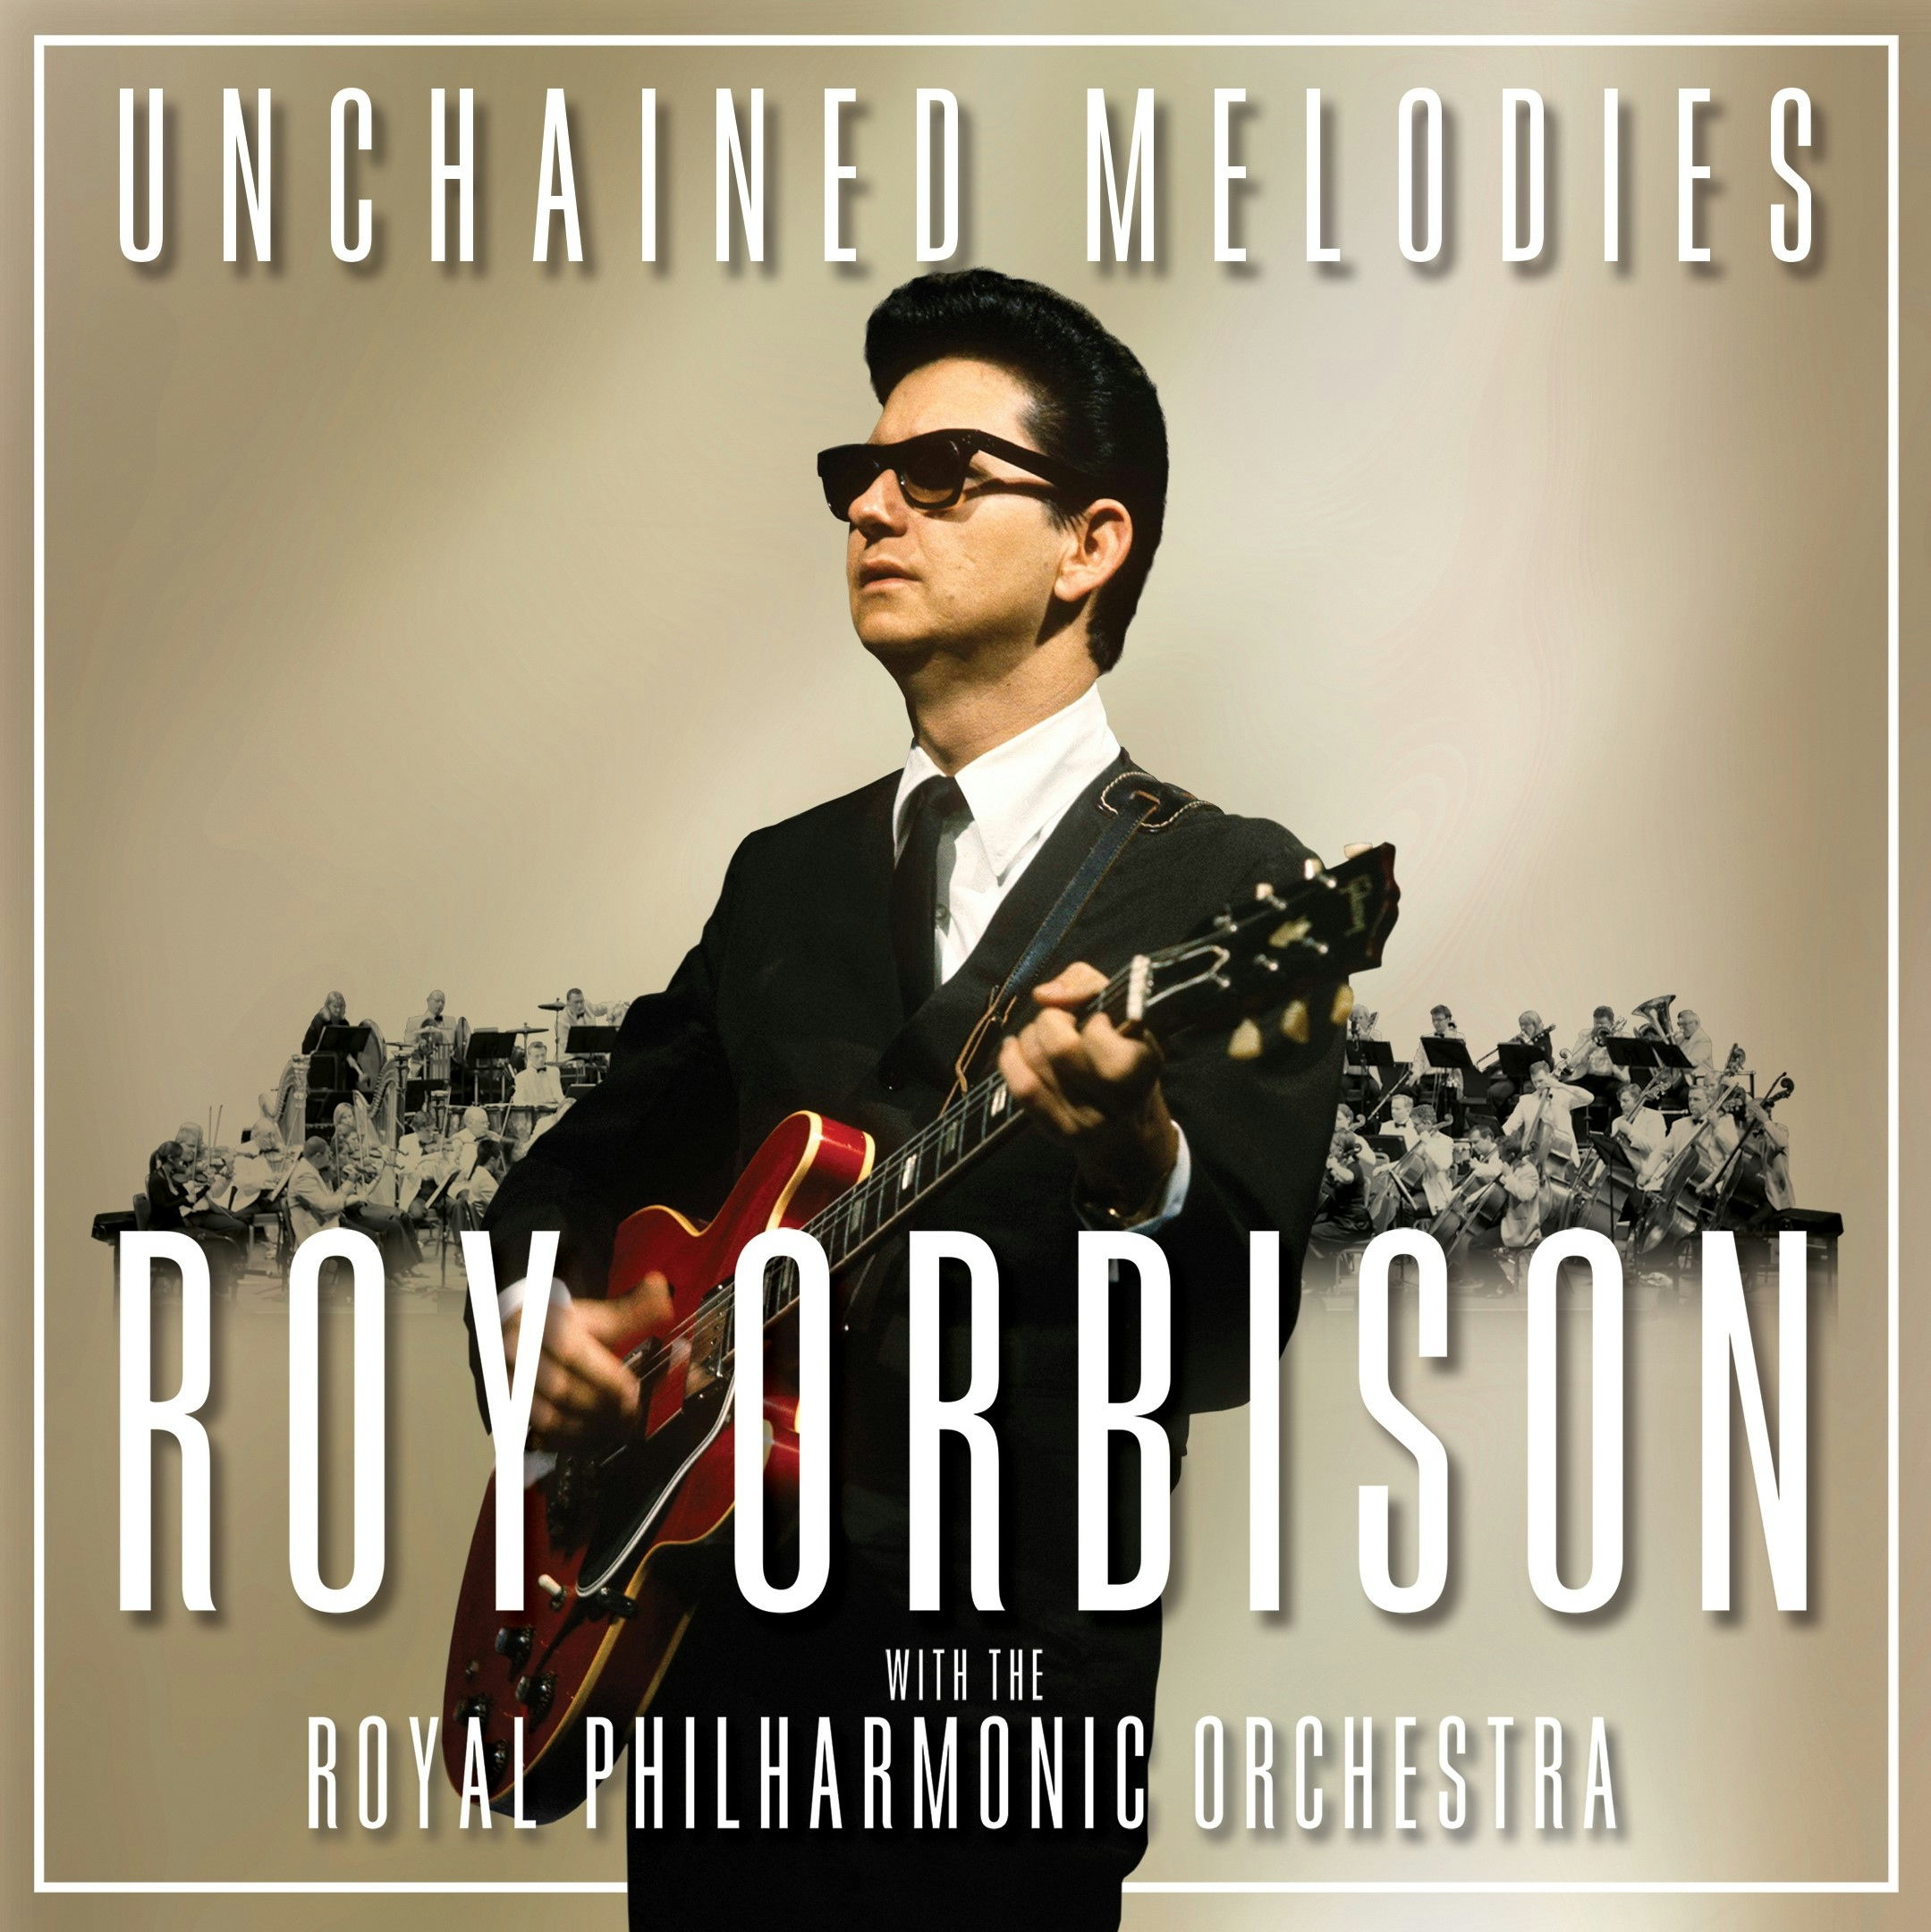 Album artwork for Album artwork for Unchained Melodies: Roy Orbison and The Royal Philharmonic Orchestra - Volume 2 by Roy Orbison by Unchained Melodies: Roy Orbison and The Royal Philharmonic Orchestra - Volume 2 - Roy Orbison